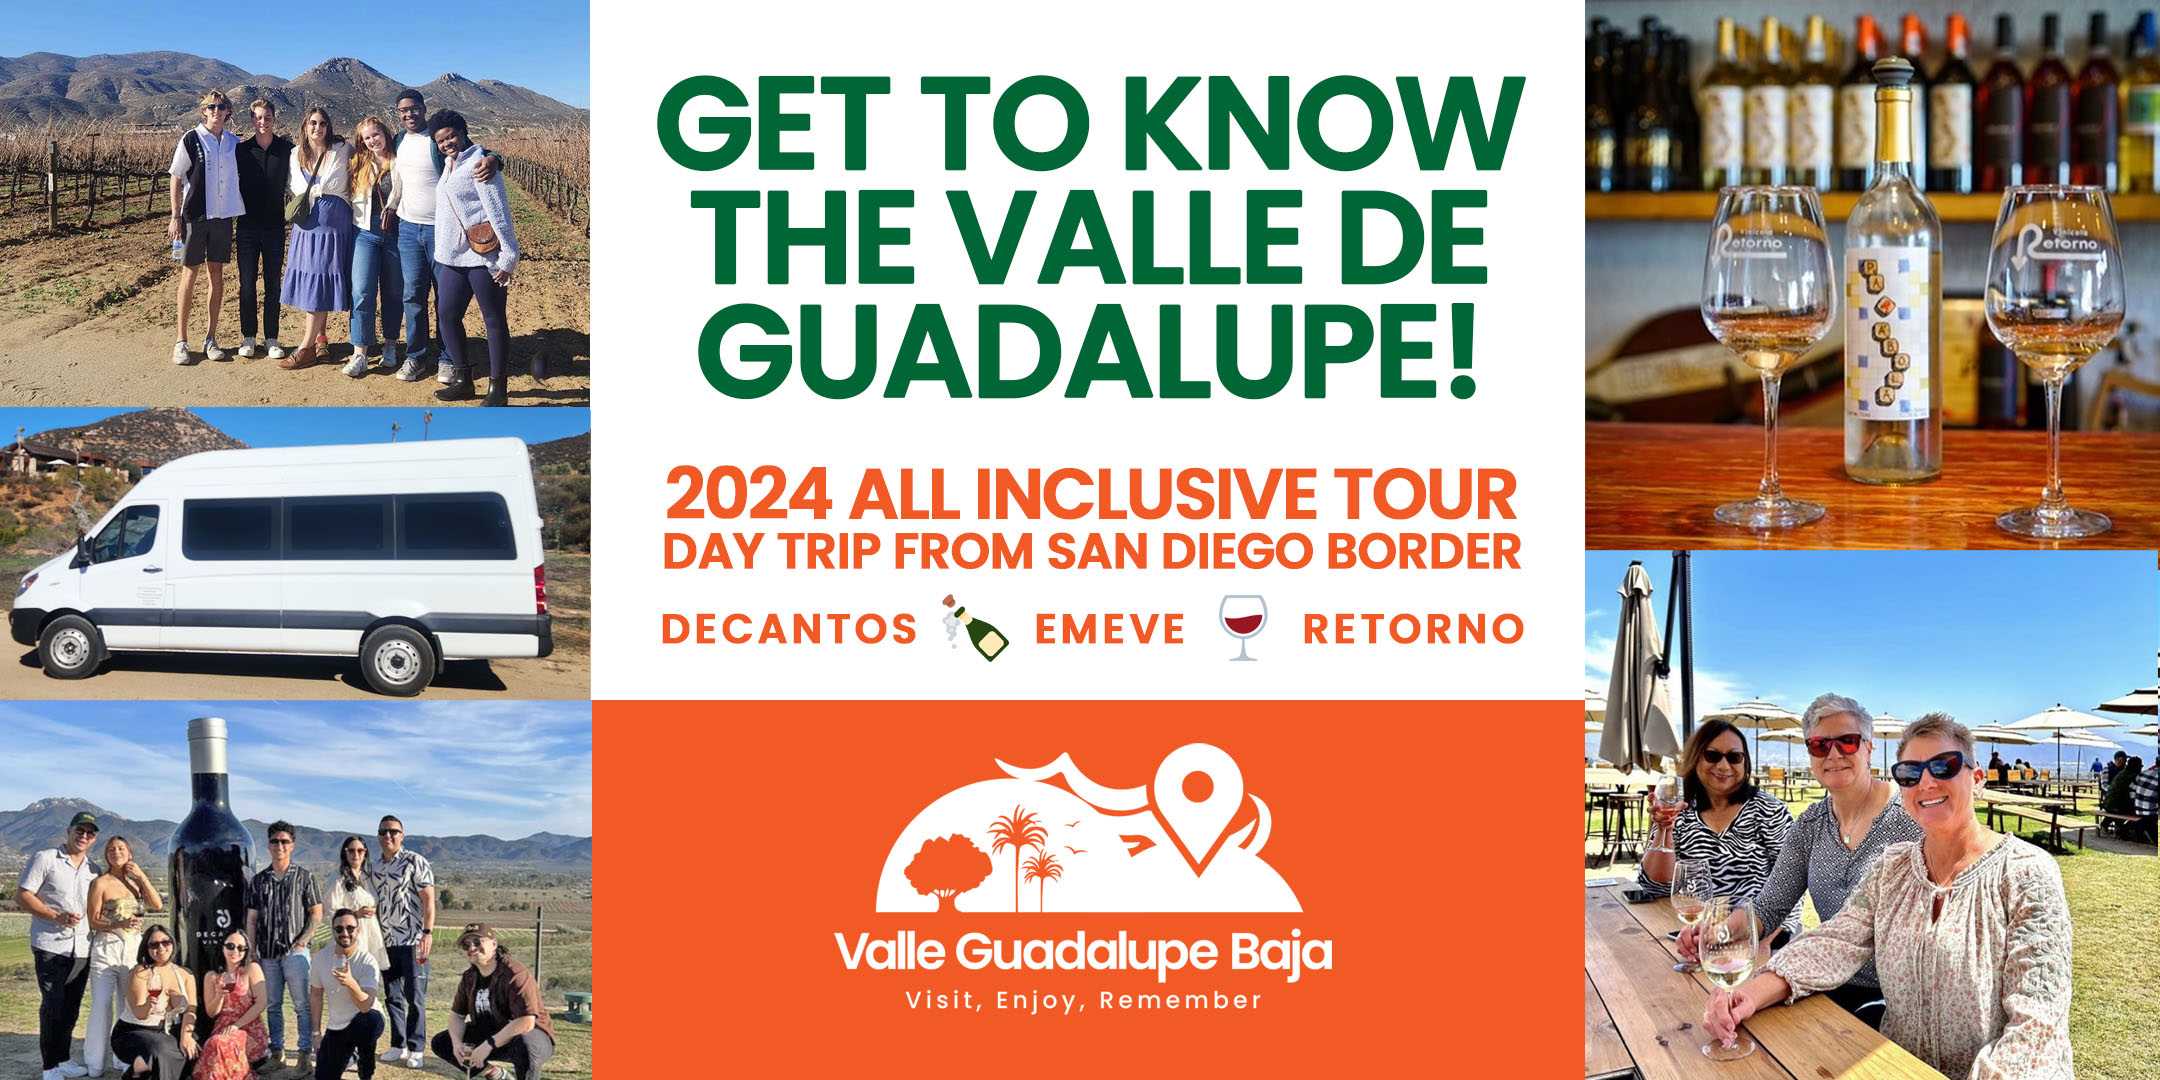 Get to know the Valle de Guadalupe Tour from USA Side Pedeast!